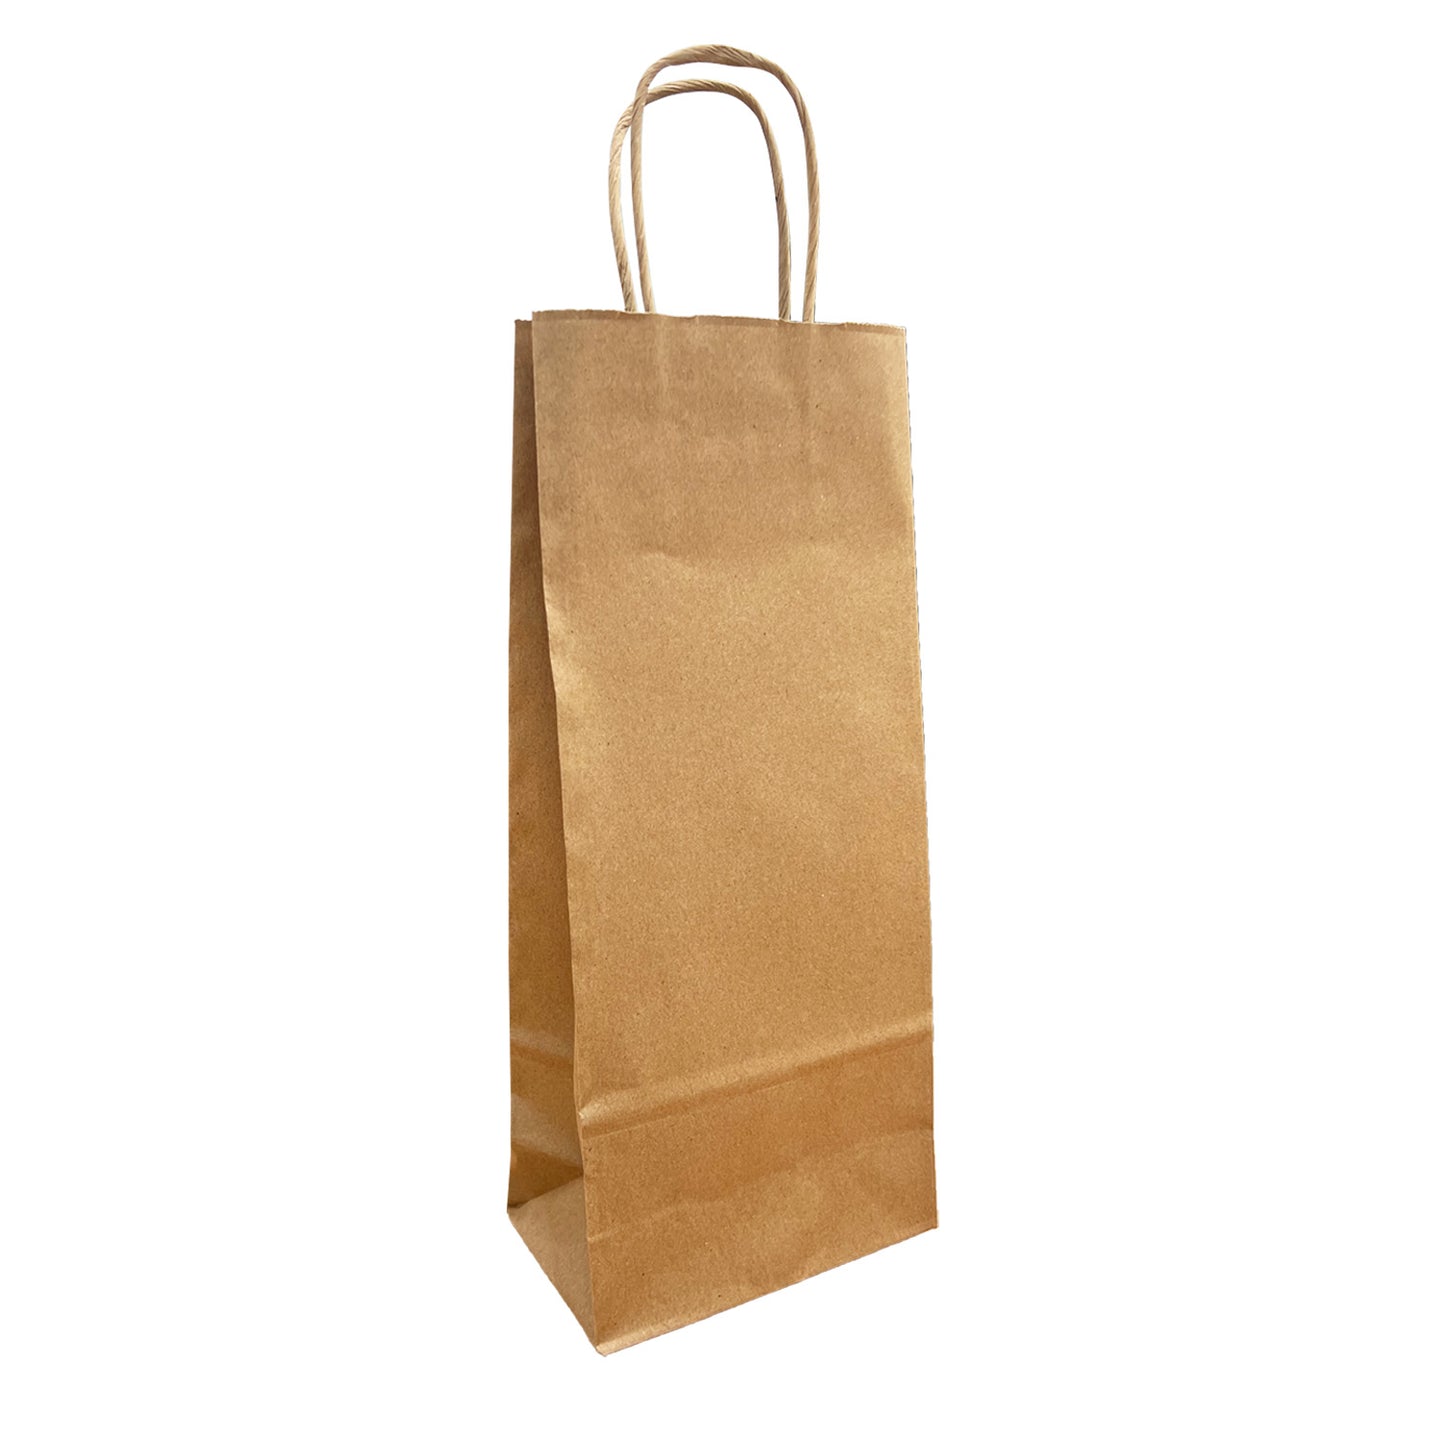 250 Pcs, Wine, 5x3.5x13.25 inches, Kraft Paper Bags, with Twisted Handle